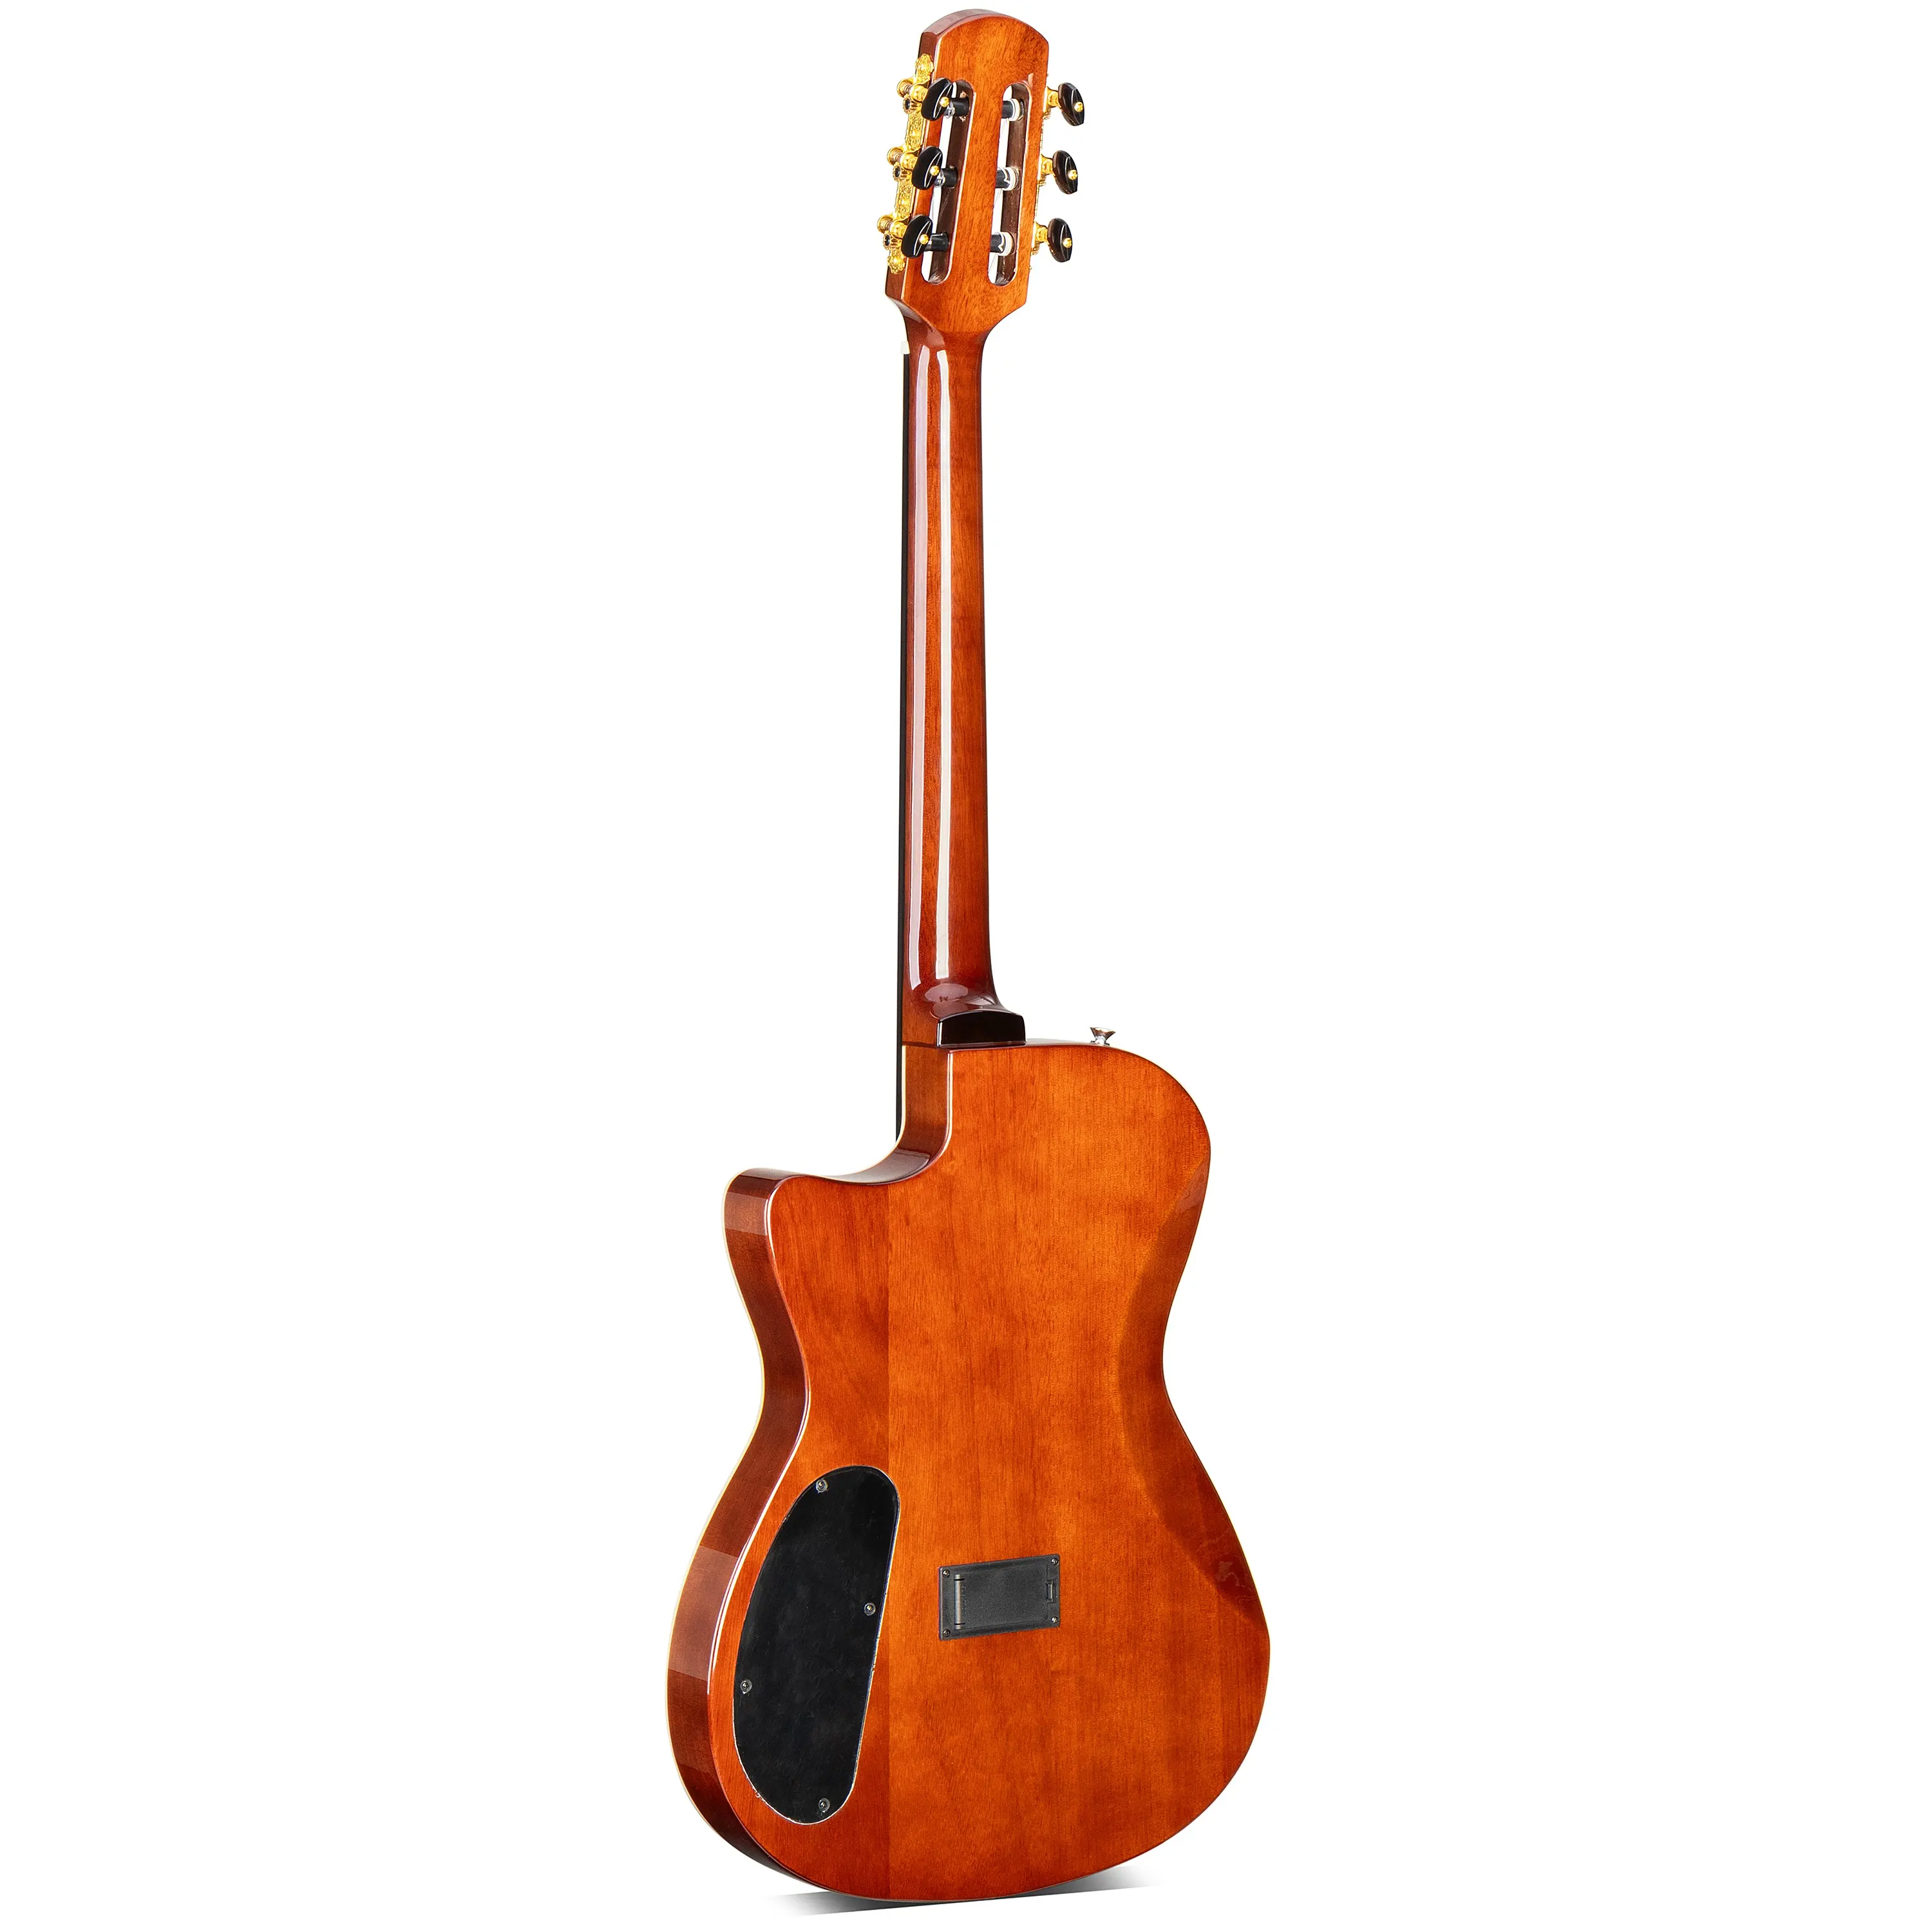 Artiny high Quality OEM New Product 39 inch silent guitar Wholesale Musical Instrument